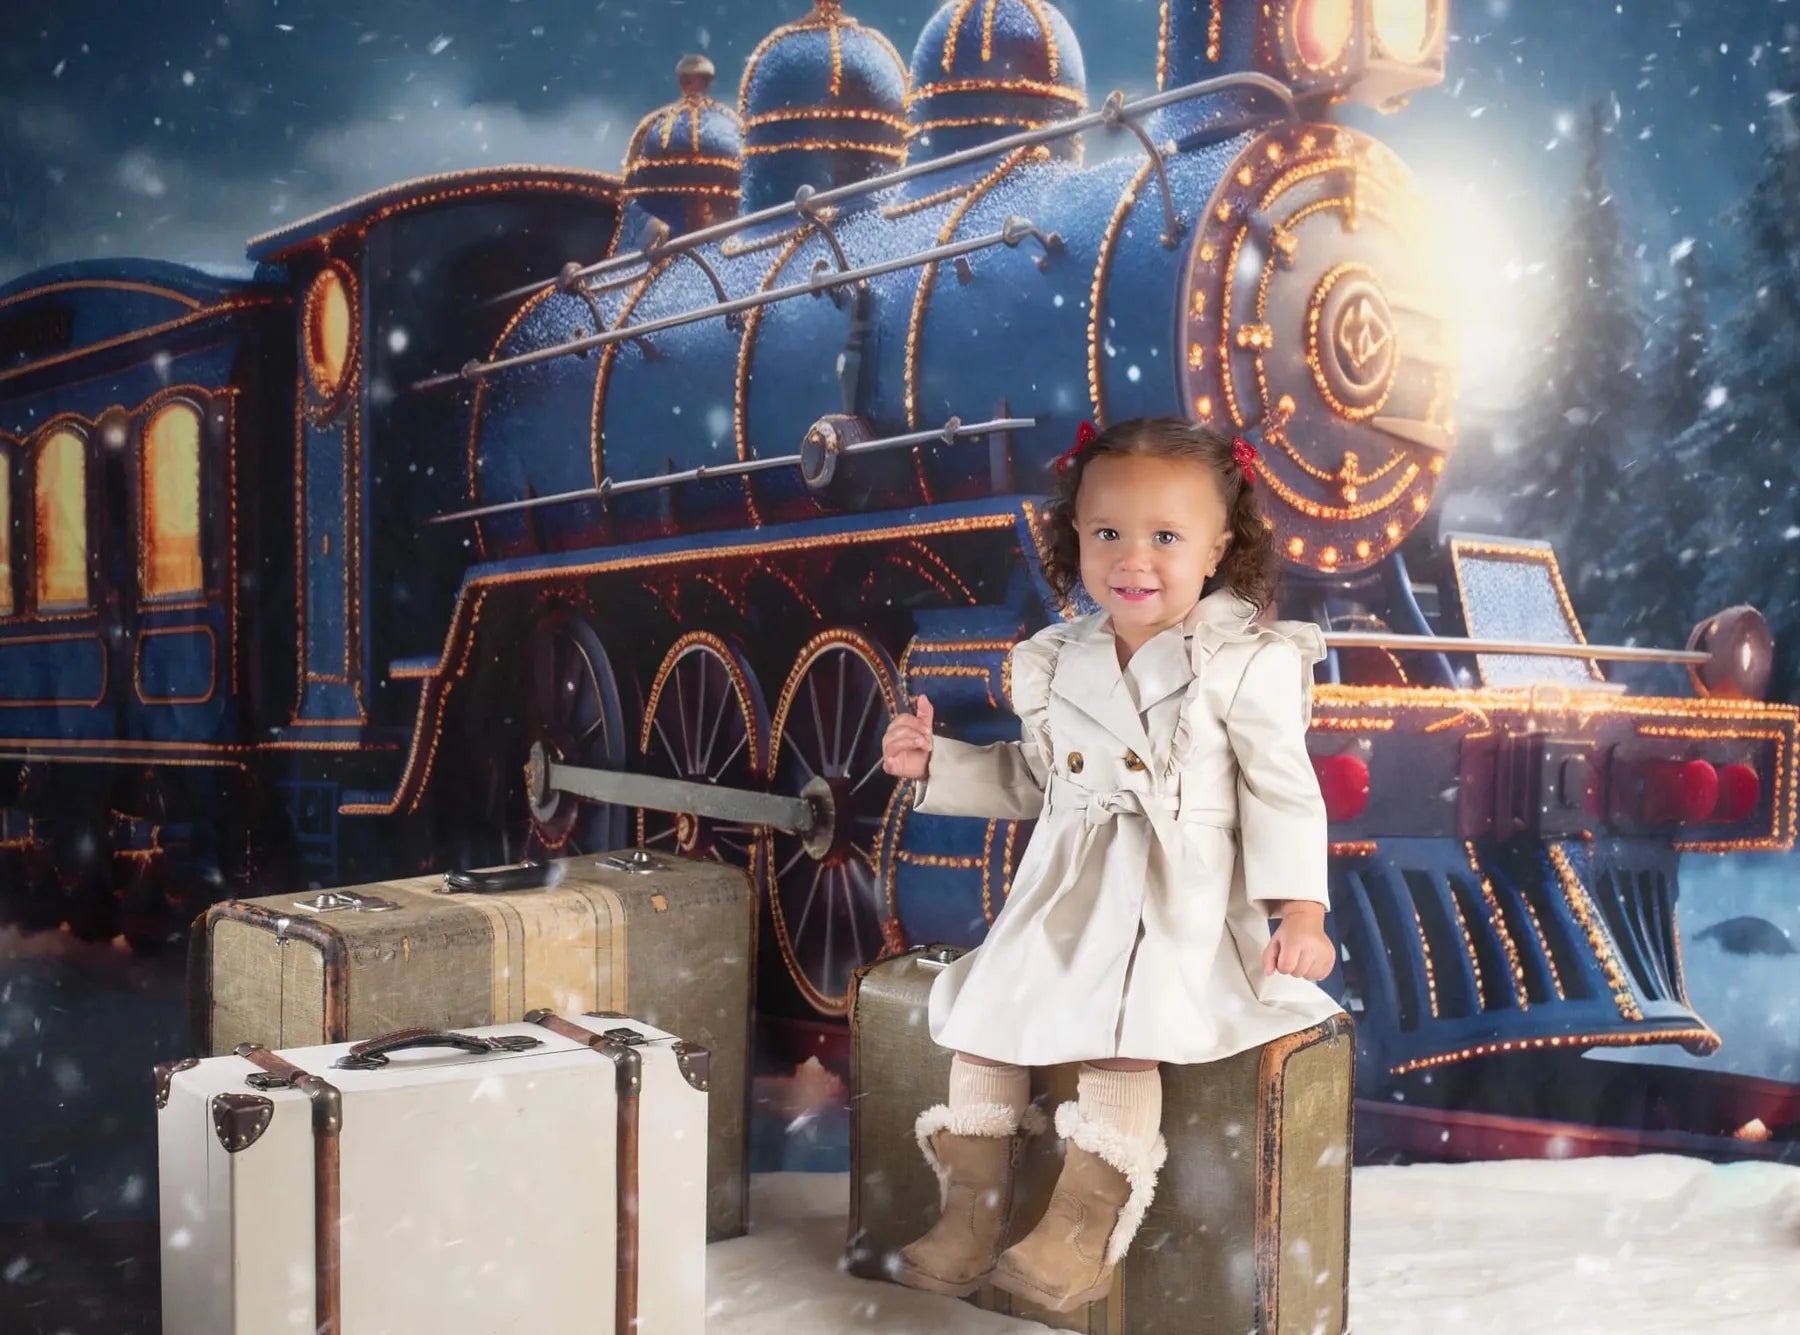 Kate Christmas Light Train in Snowy Night Backdrop for Photography